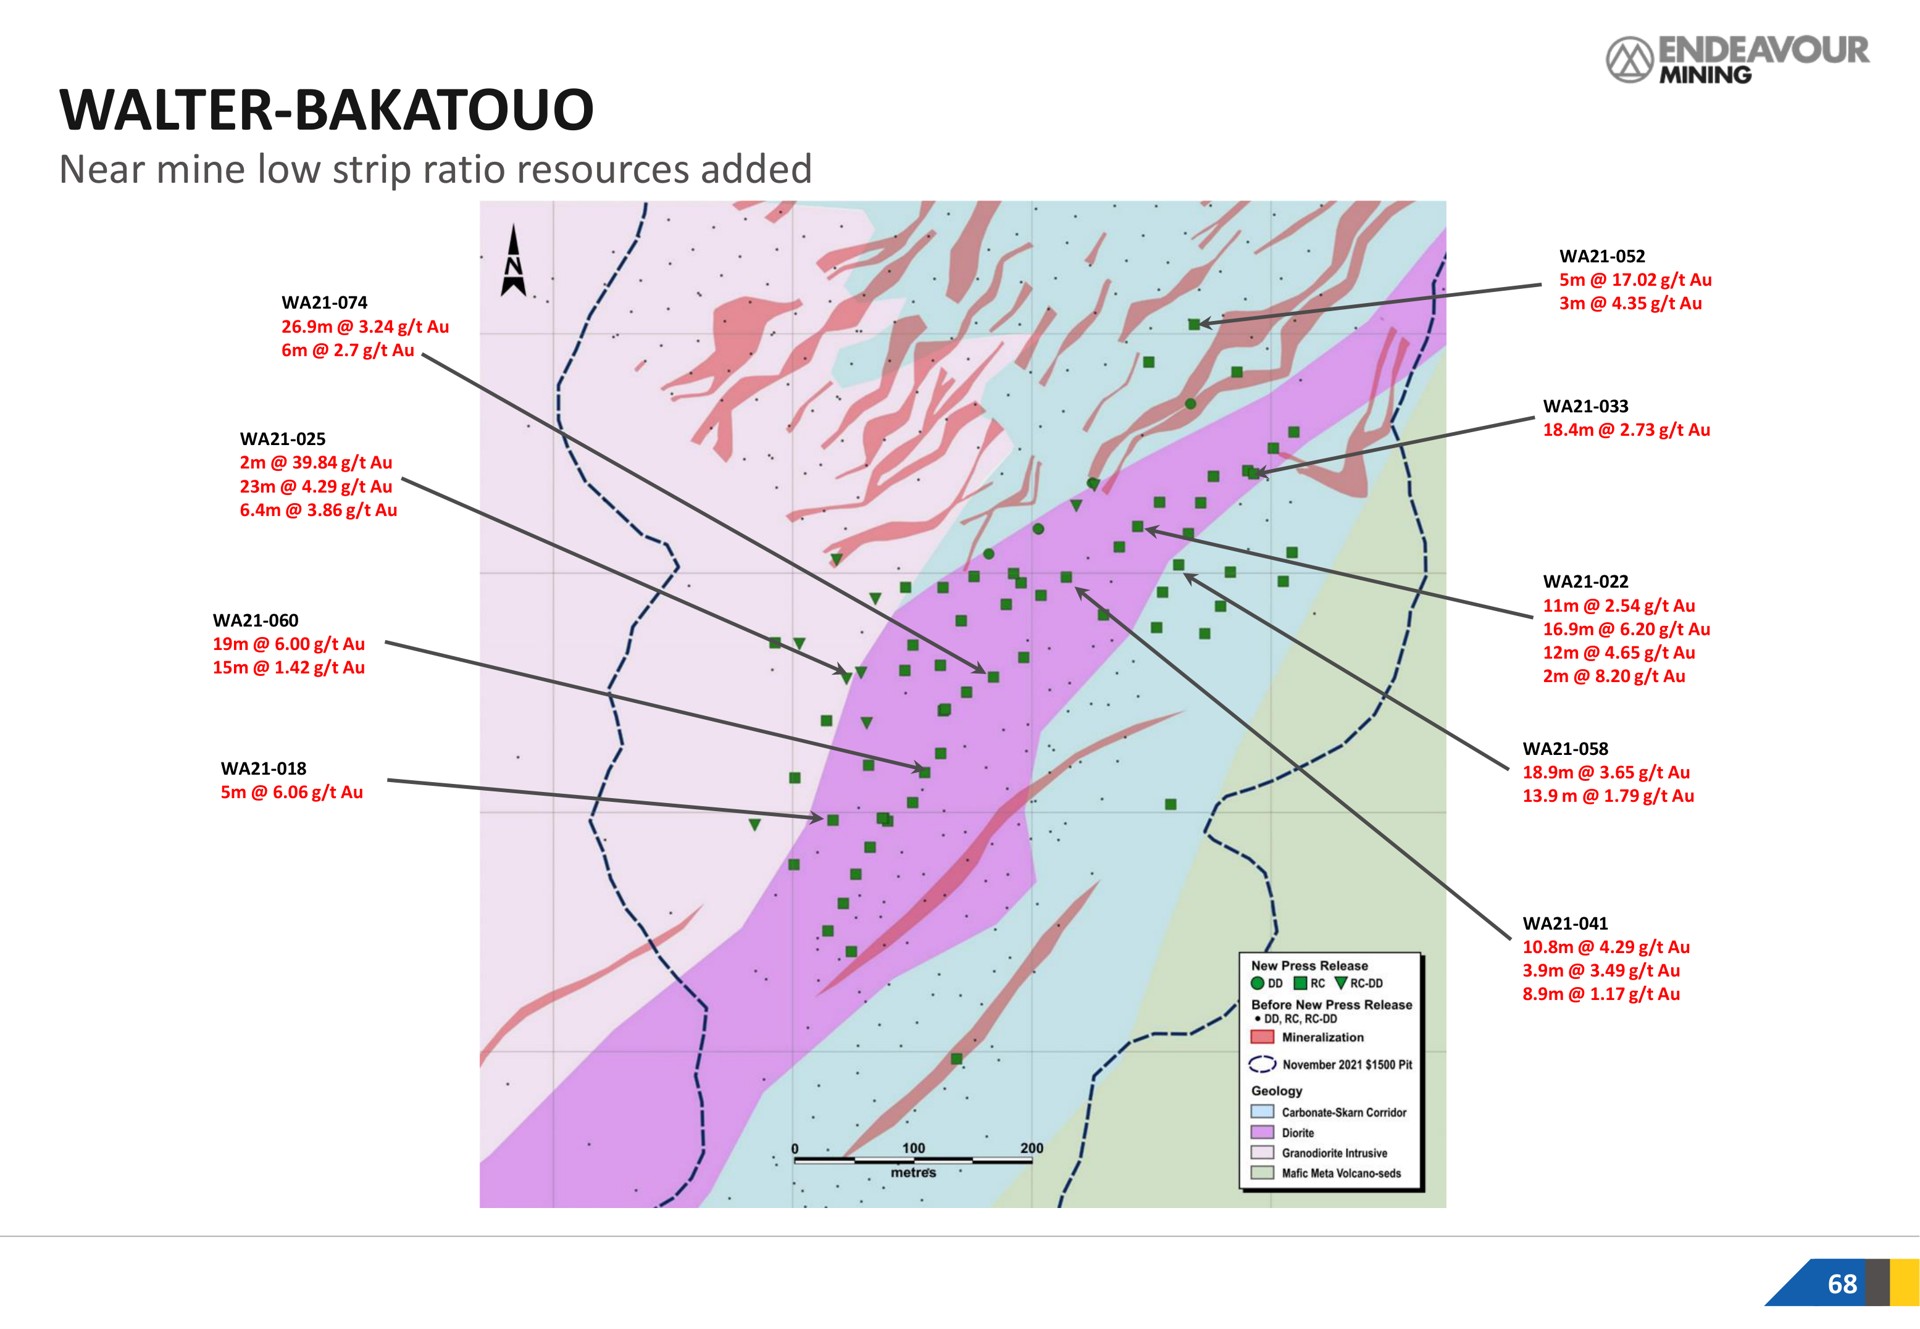 walter near mine low strip ratio resources added | Endeavour Mining